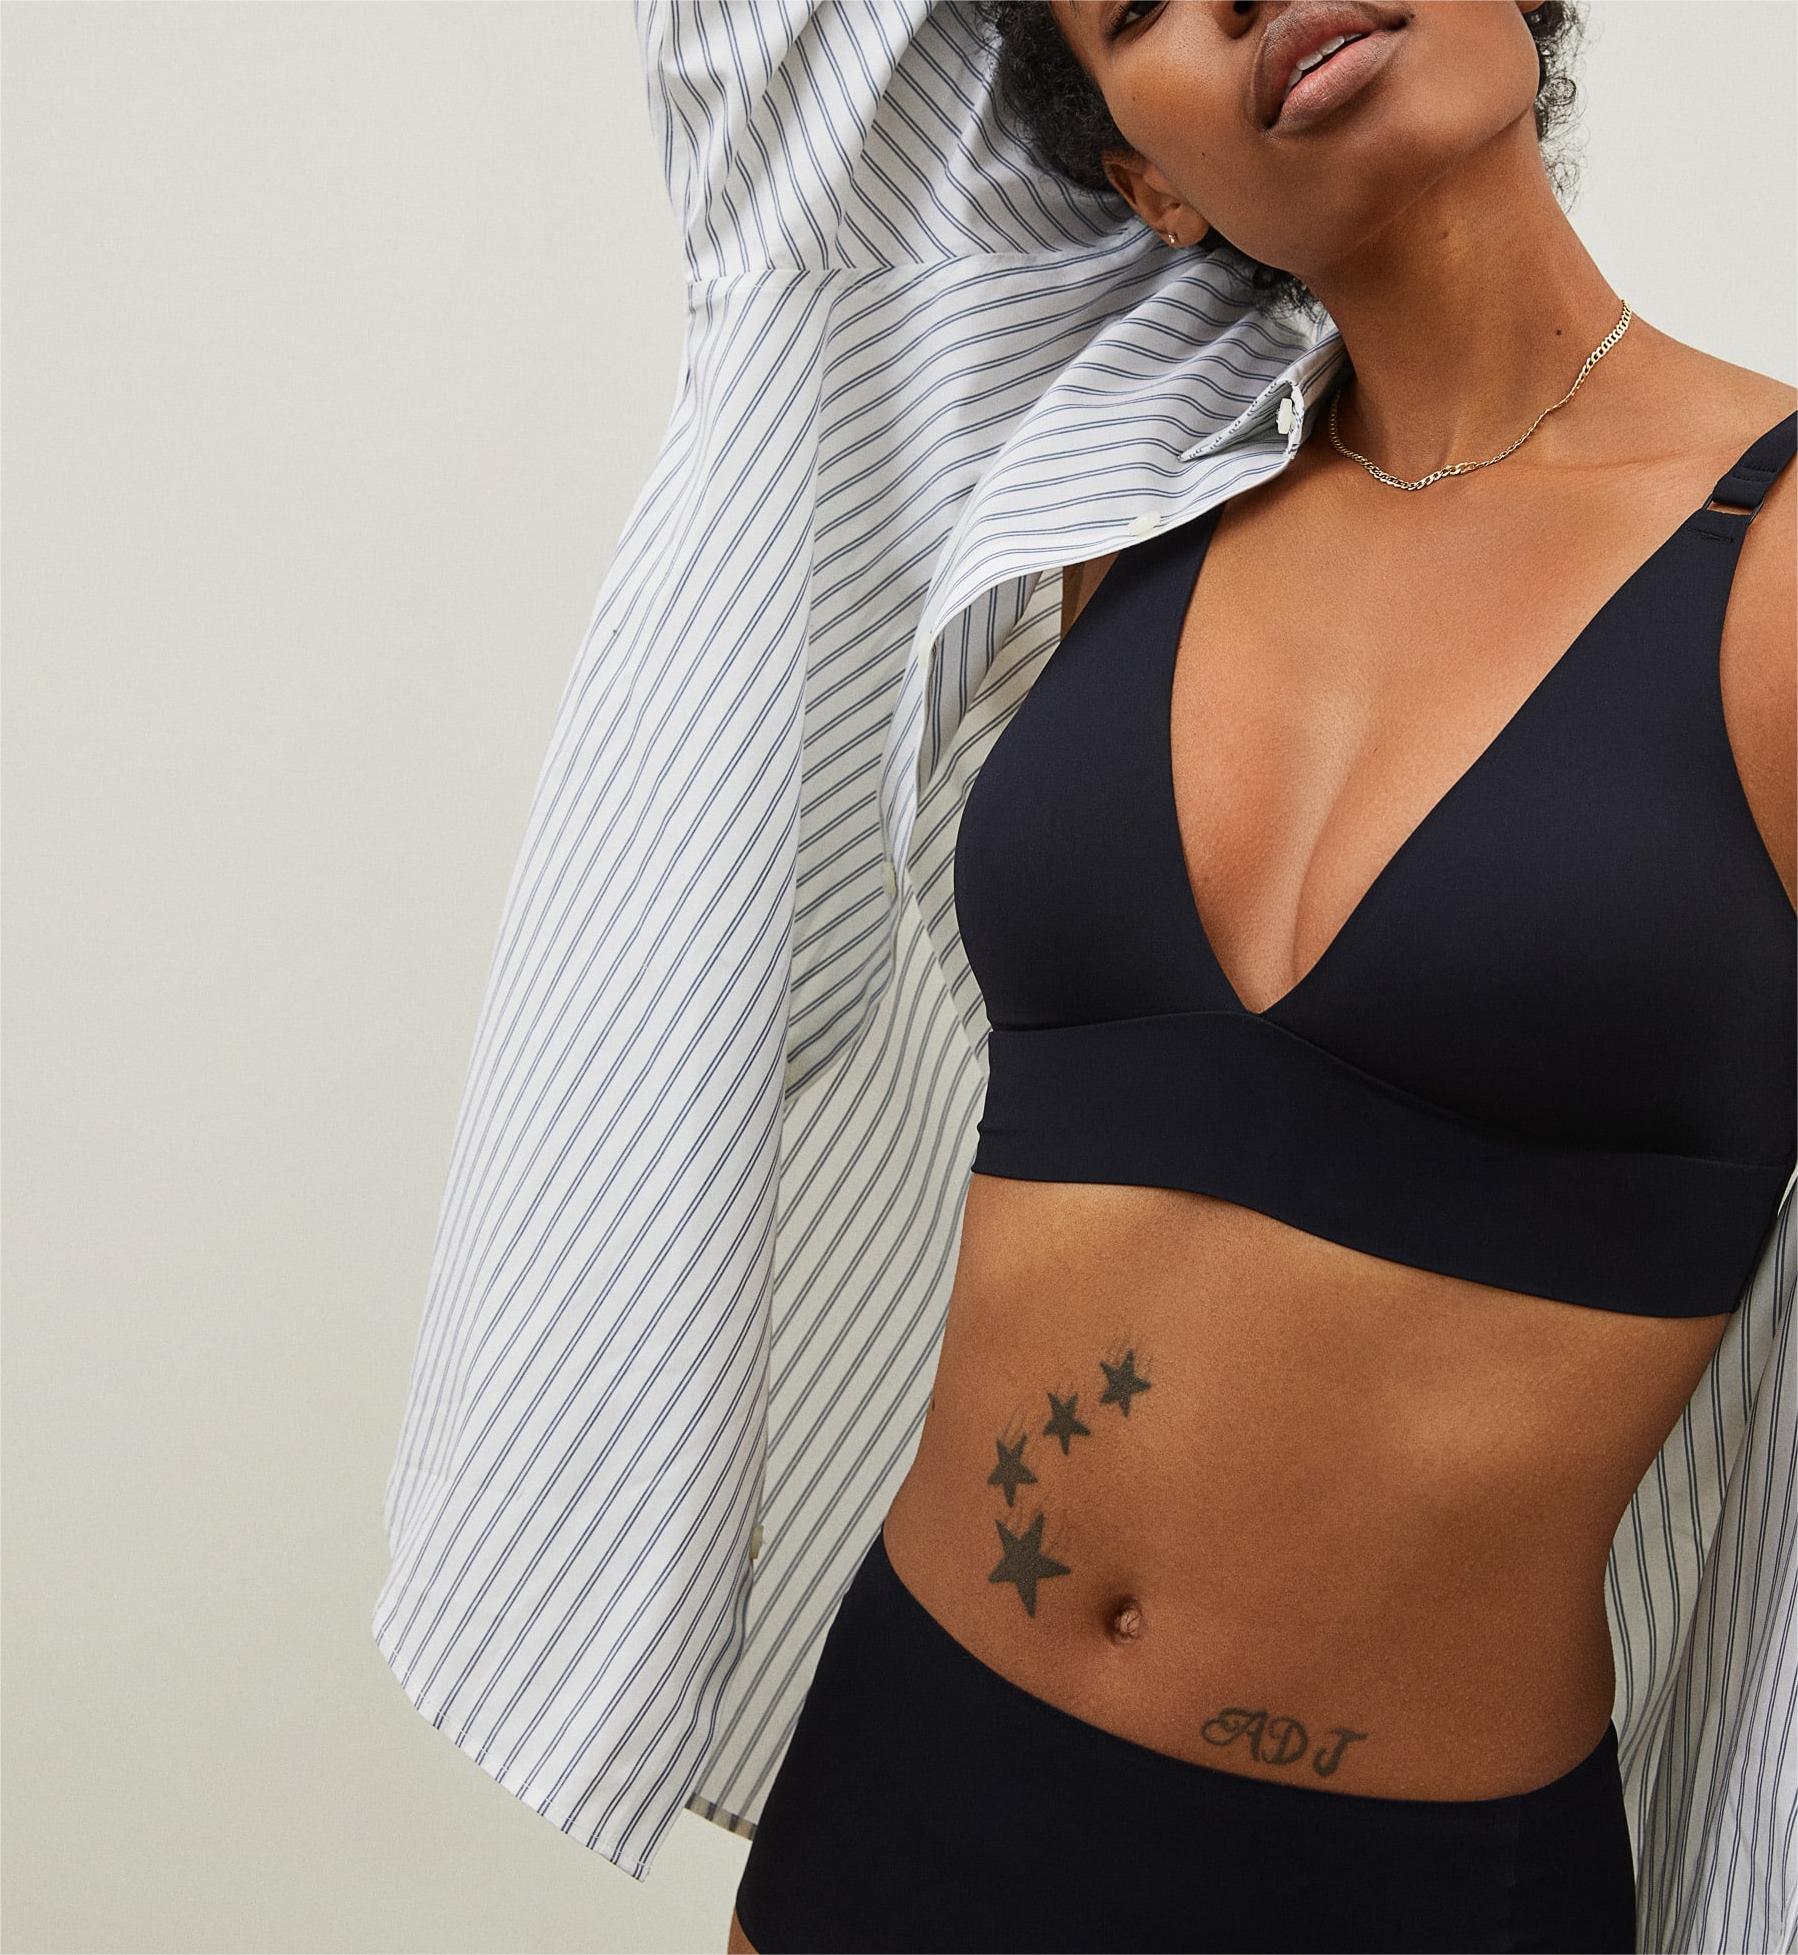 The Invisible Push Up Wireless Bra Black